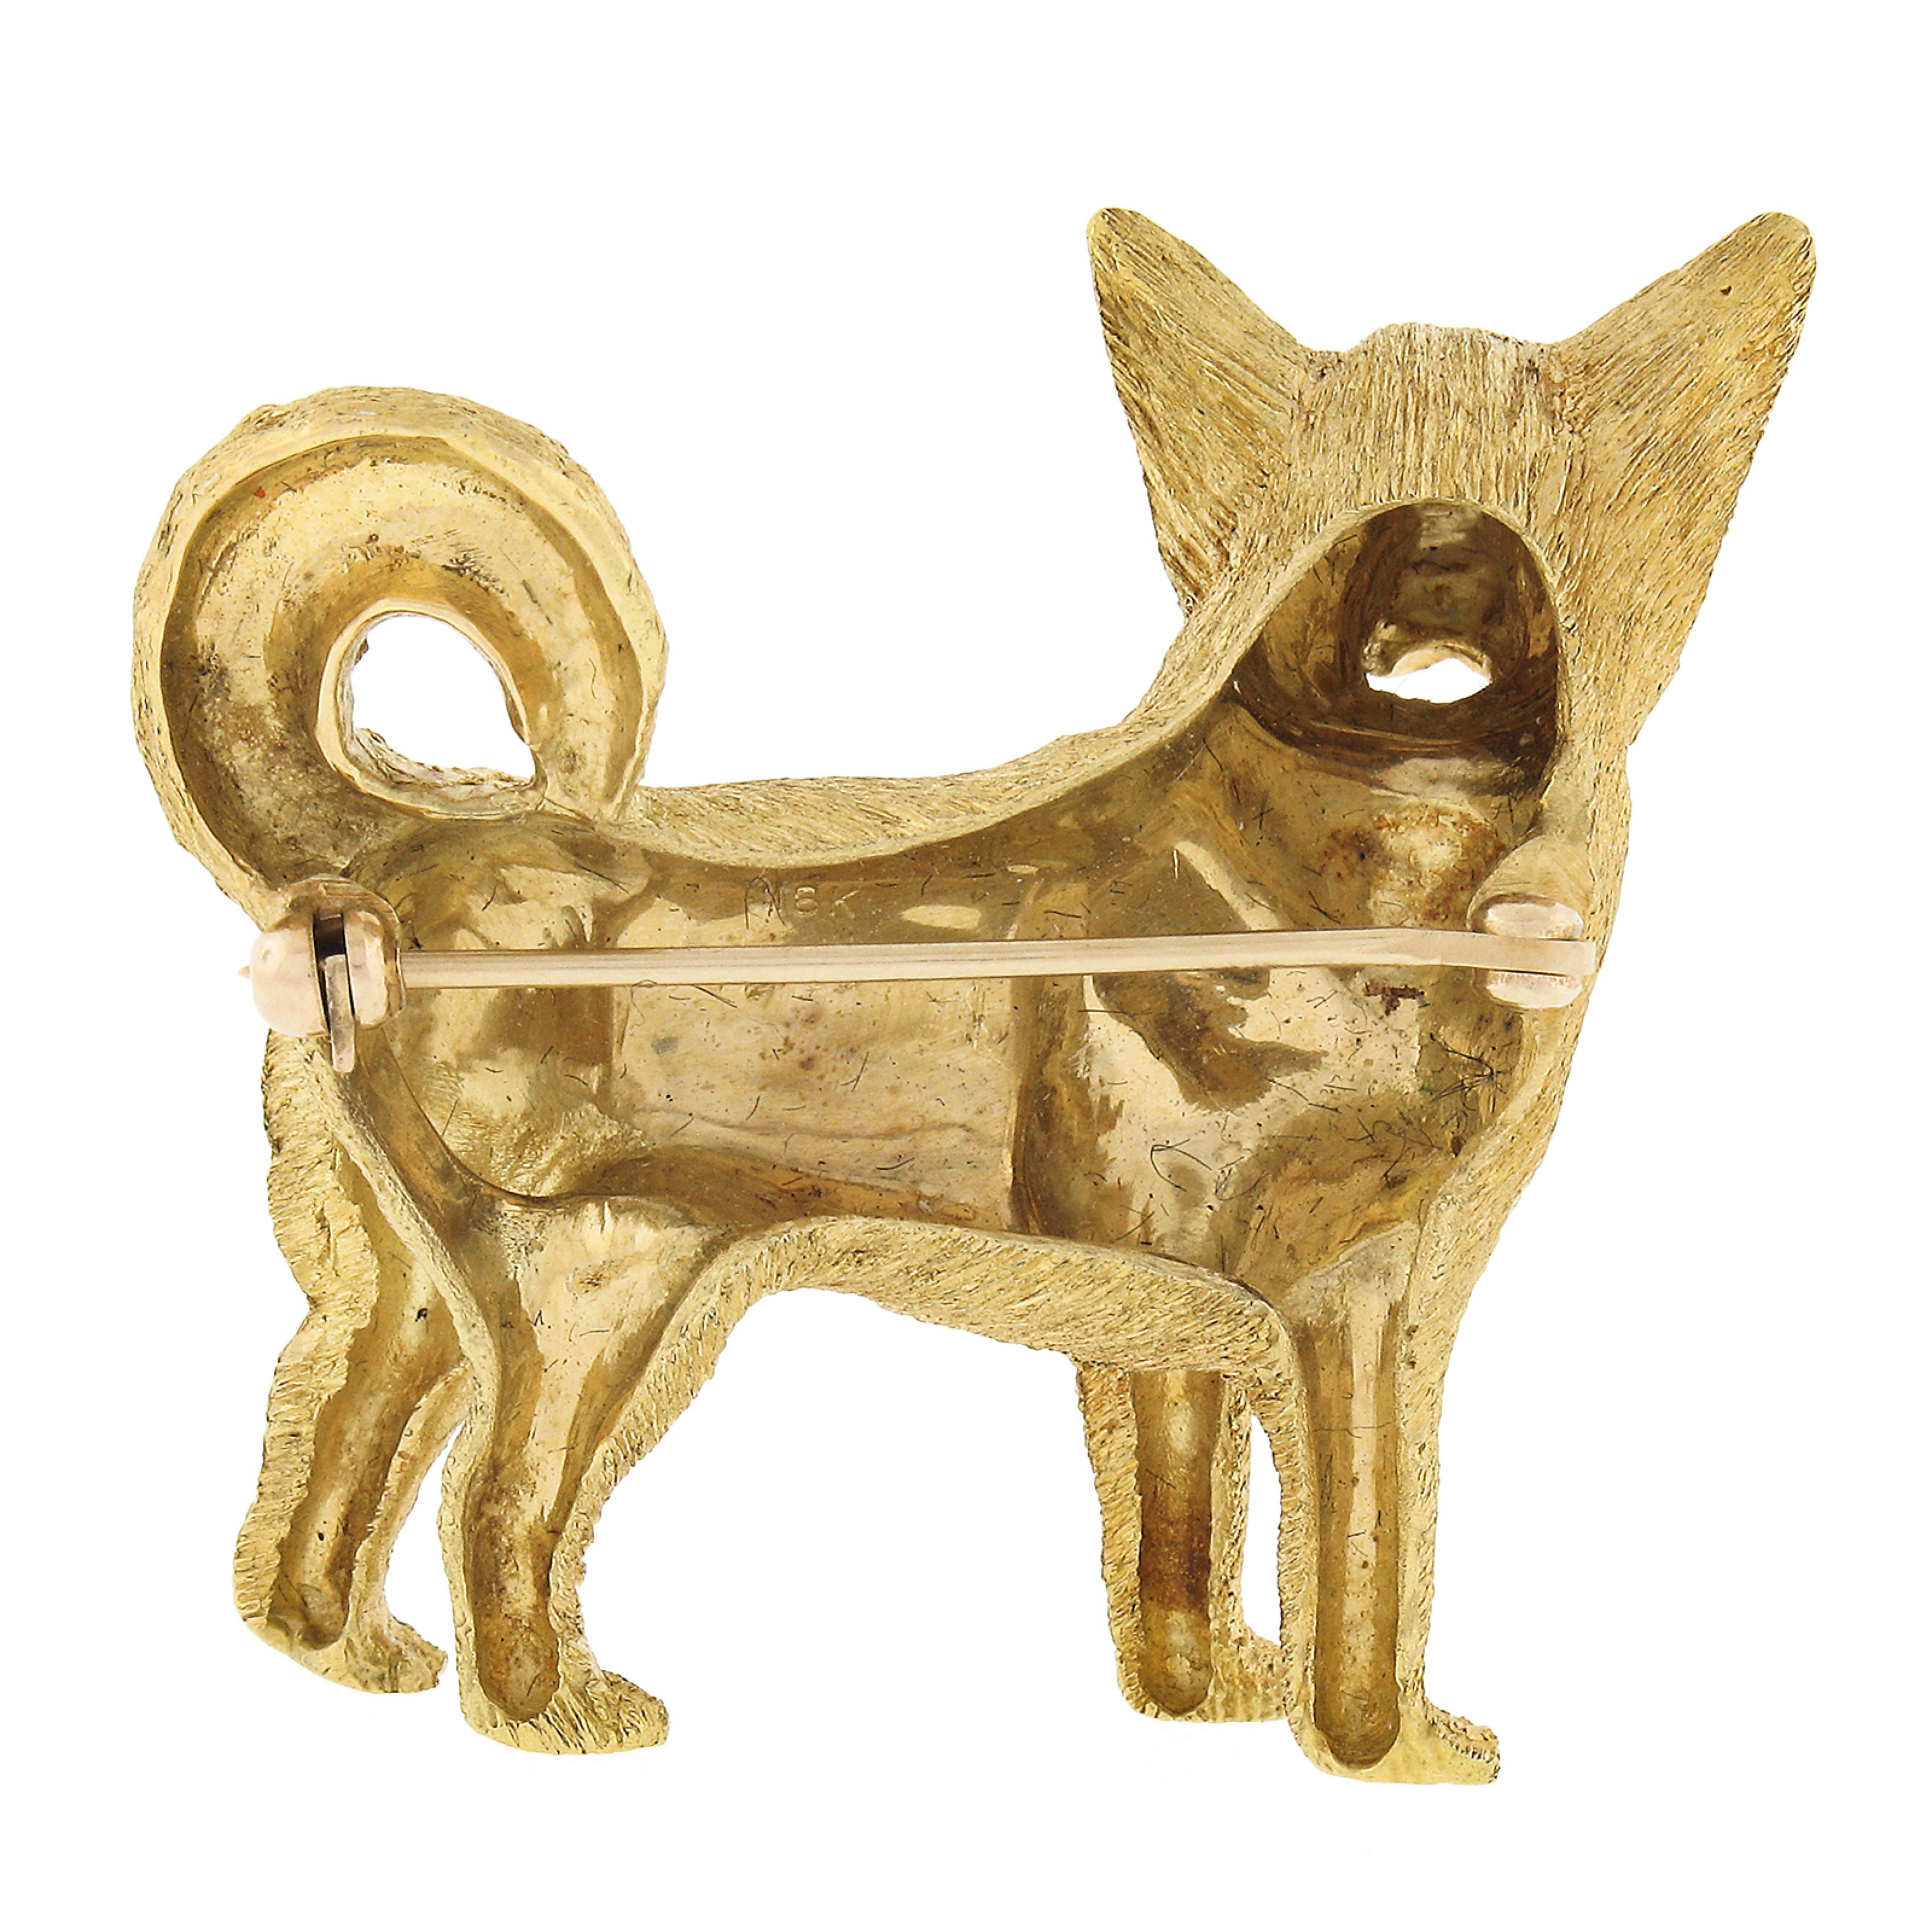 This incredible vintage brooch/pin is designed by Craig Drake and very well crafted in solid 18k yellow gold. It features a perfectly structured standing Shepard dog design with its tongue out showing unique, and remarkably outstanding workmanship